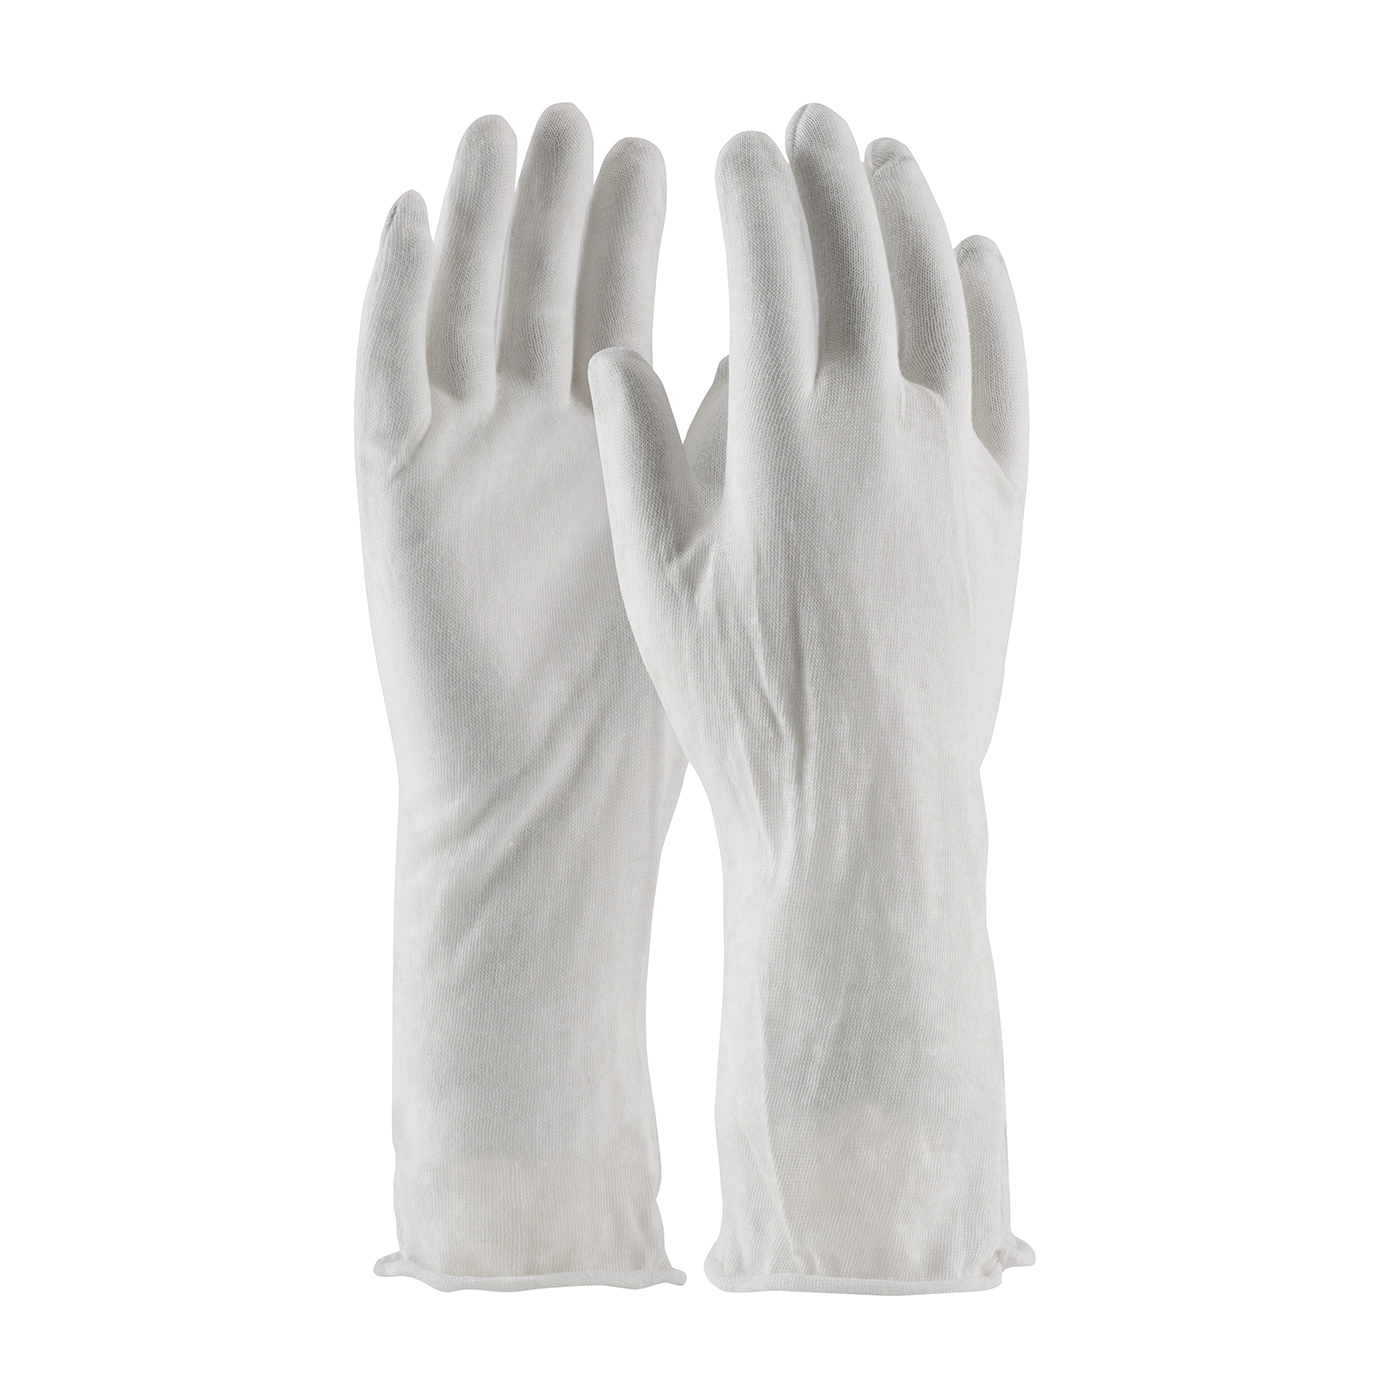 PIP® CleanTeam® 97-500/14NI Economy Grade Lightweight Men's Reversible Inspection Gloves, Universal, Cotton, White, Seamless Style, Paired Hand, 14 in L